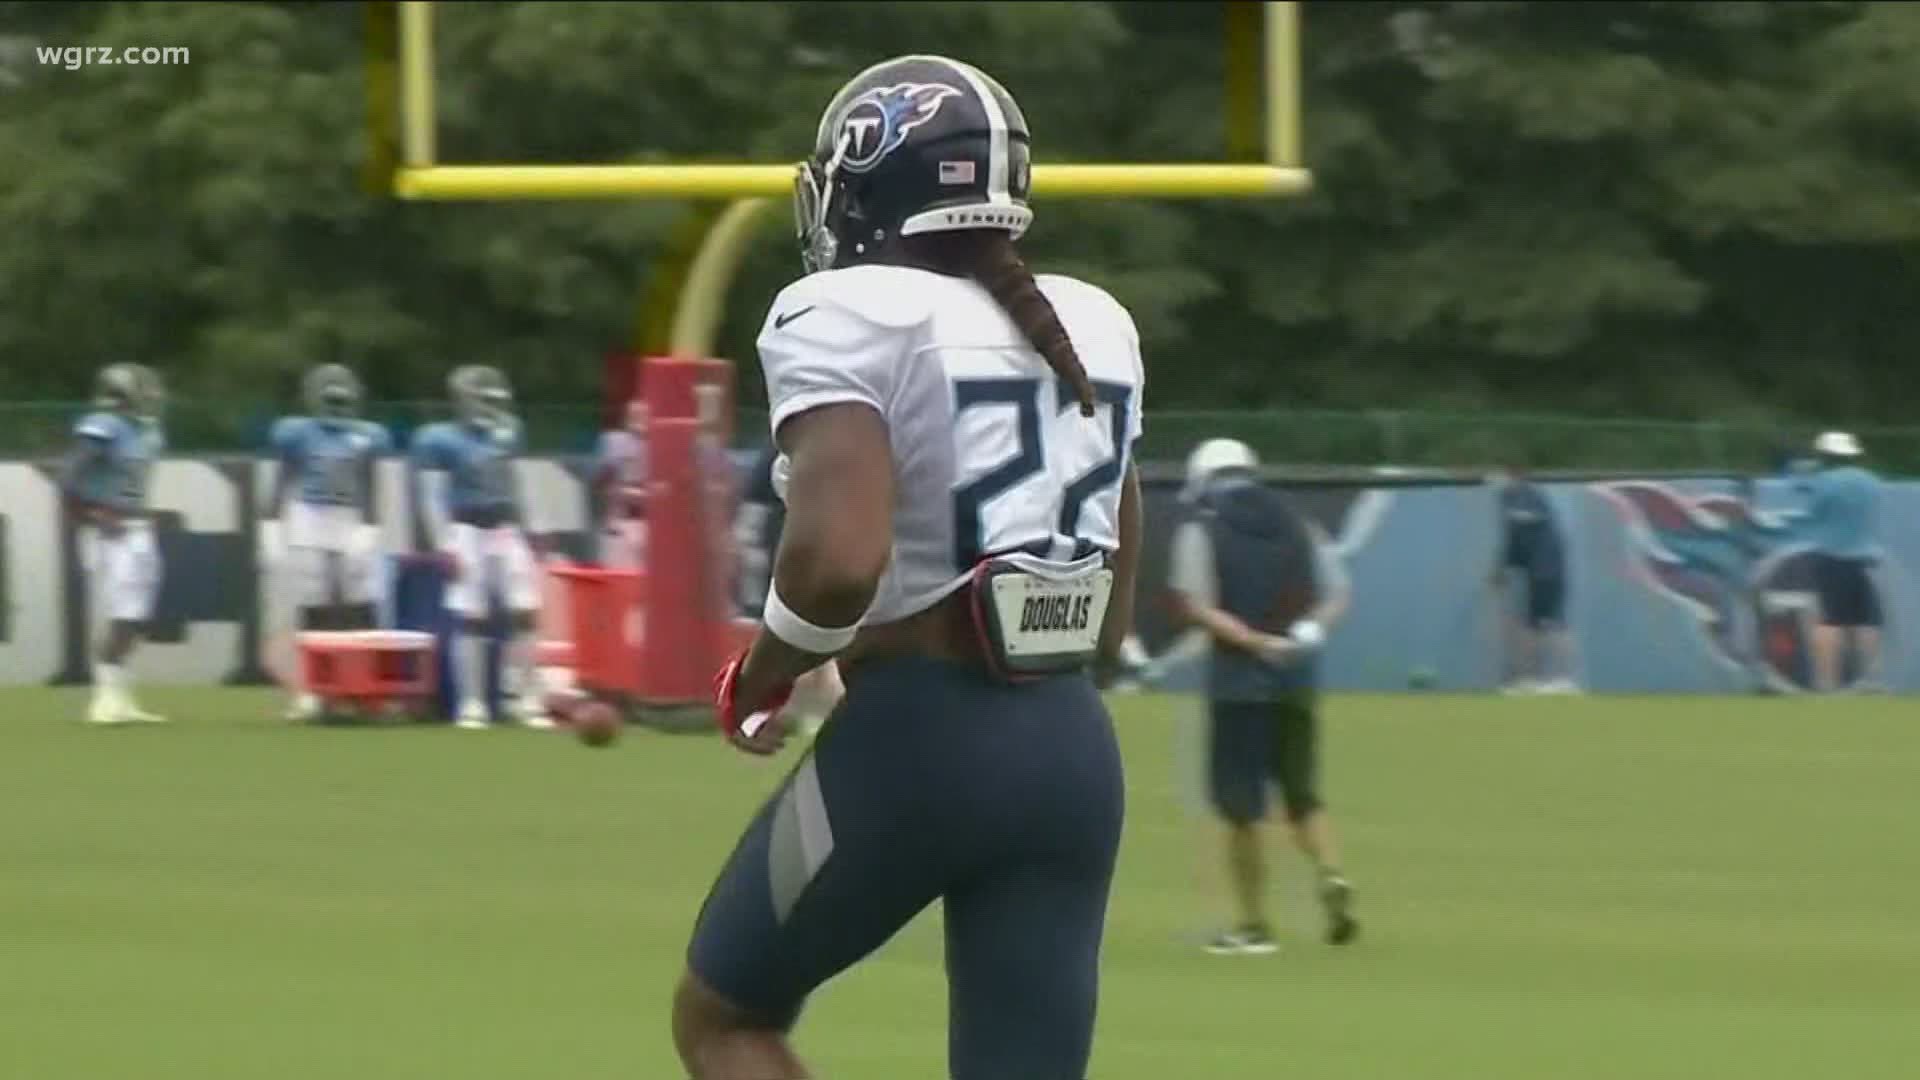 The Titans had returned to practice Saturday for the first time in October after the team's COVID outbreak.